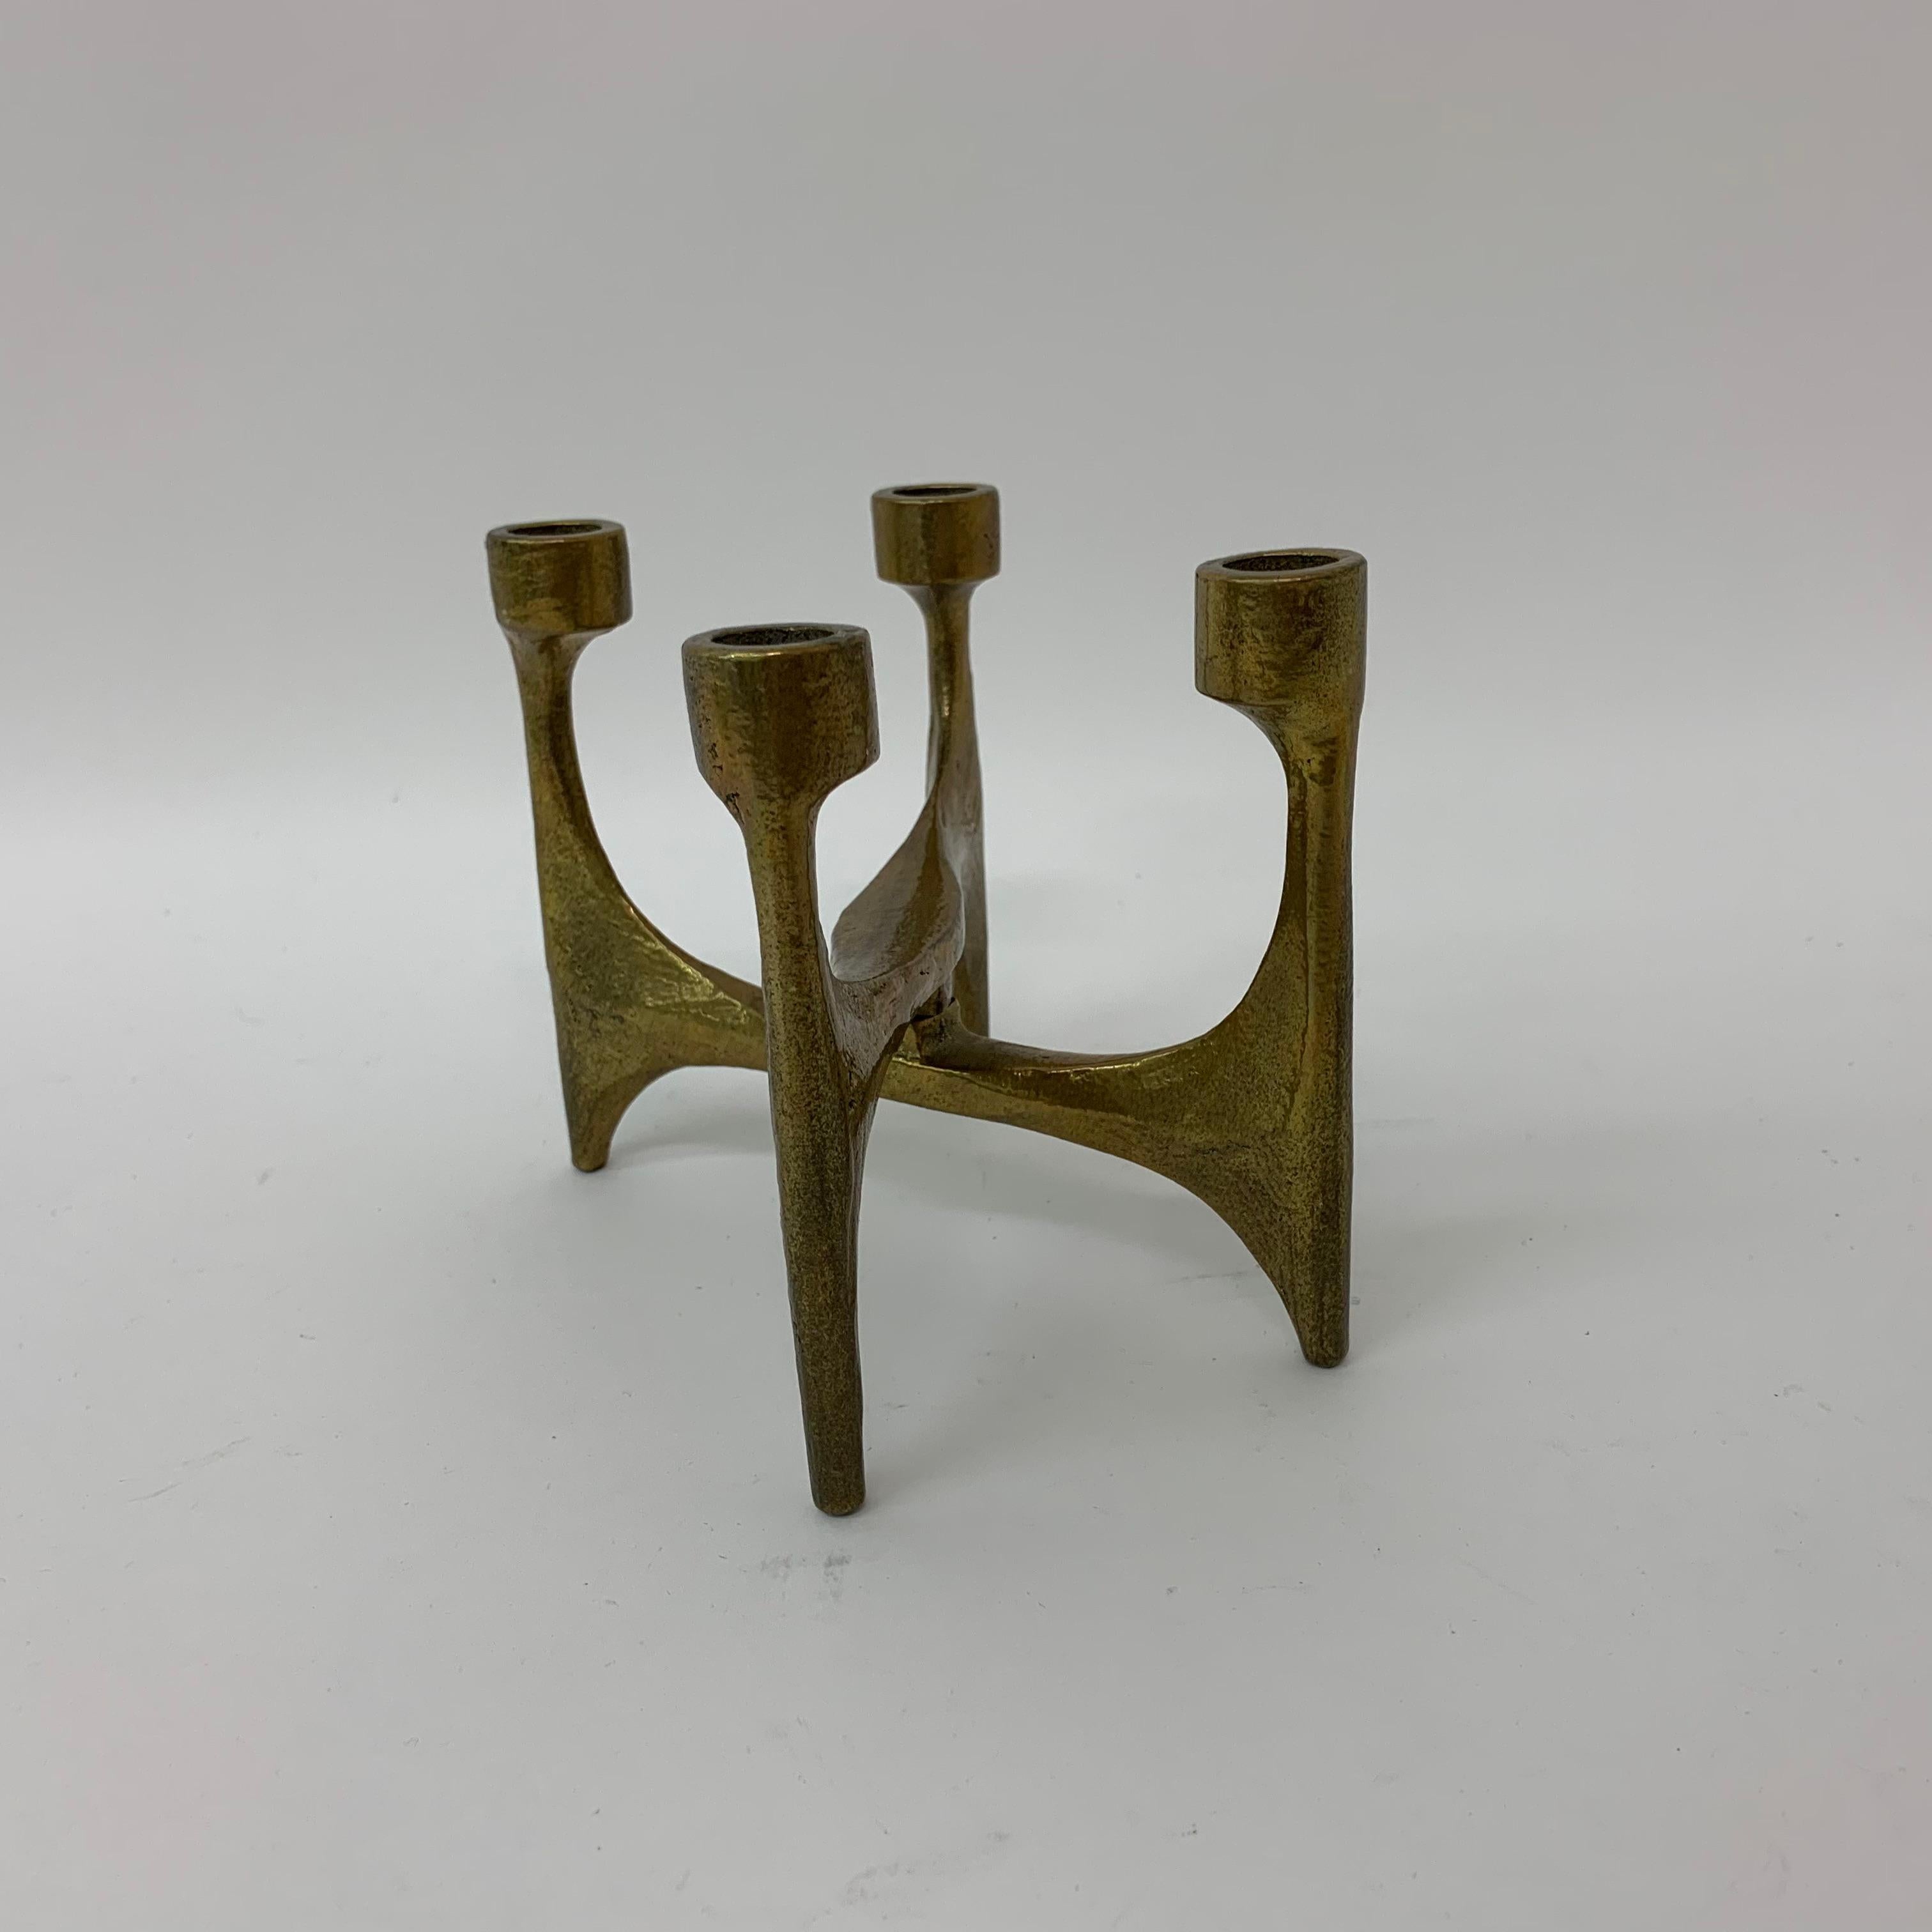 Brutalist Bronze Candle Stick, 1970’s For Sale 9